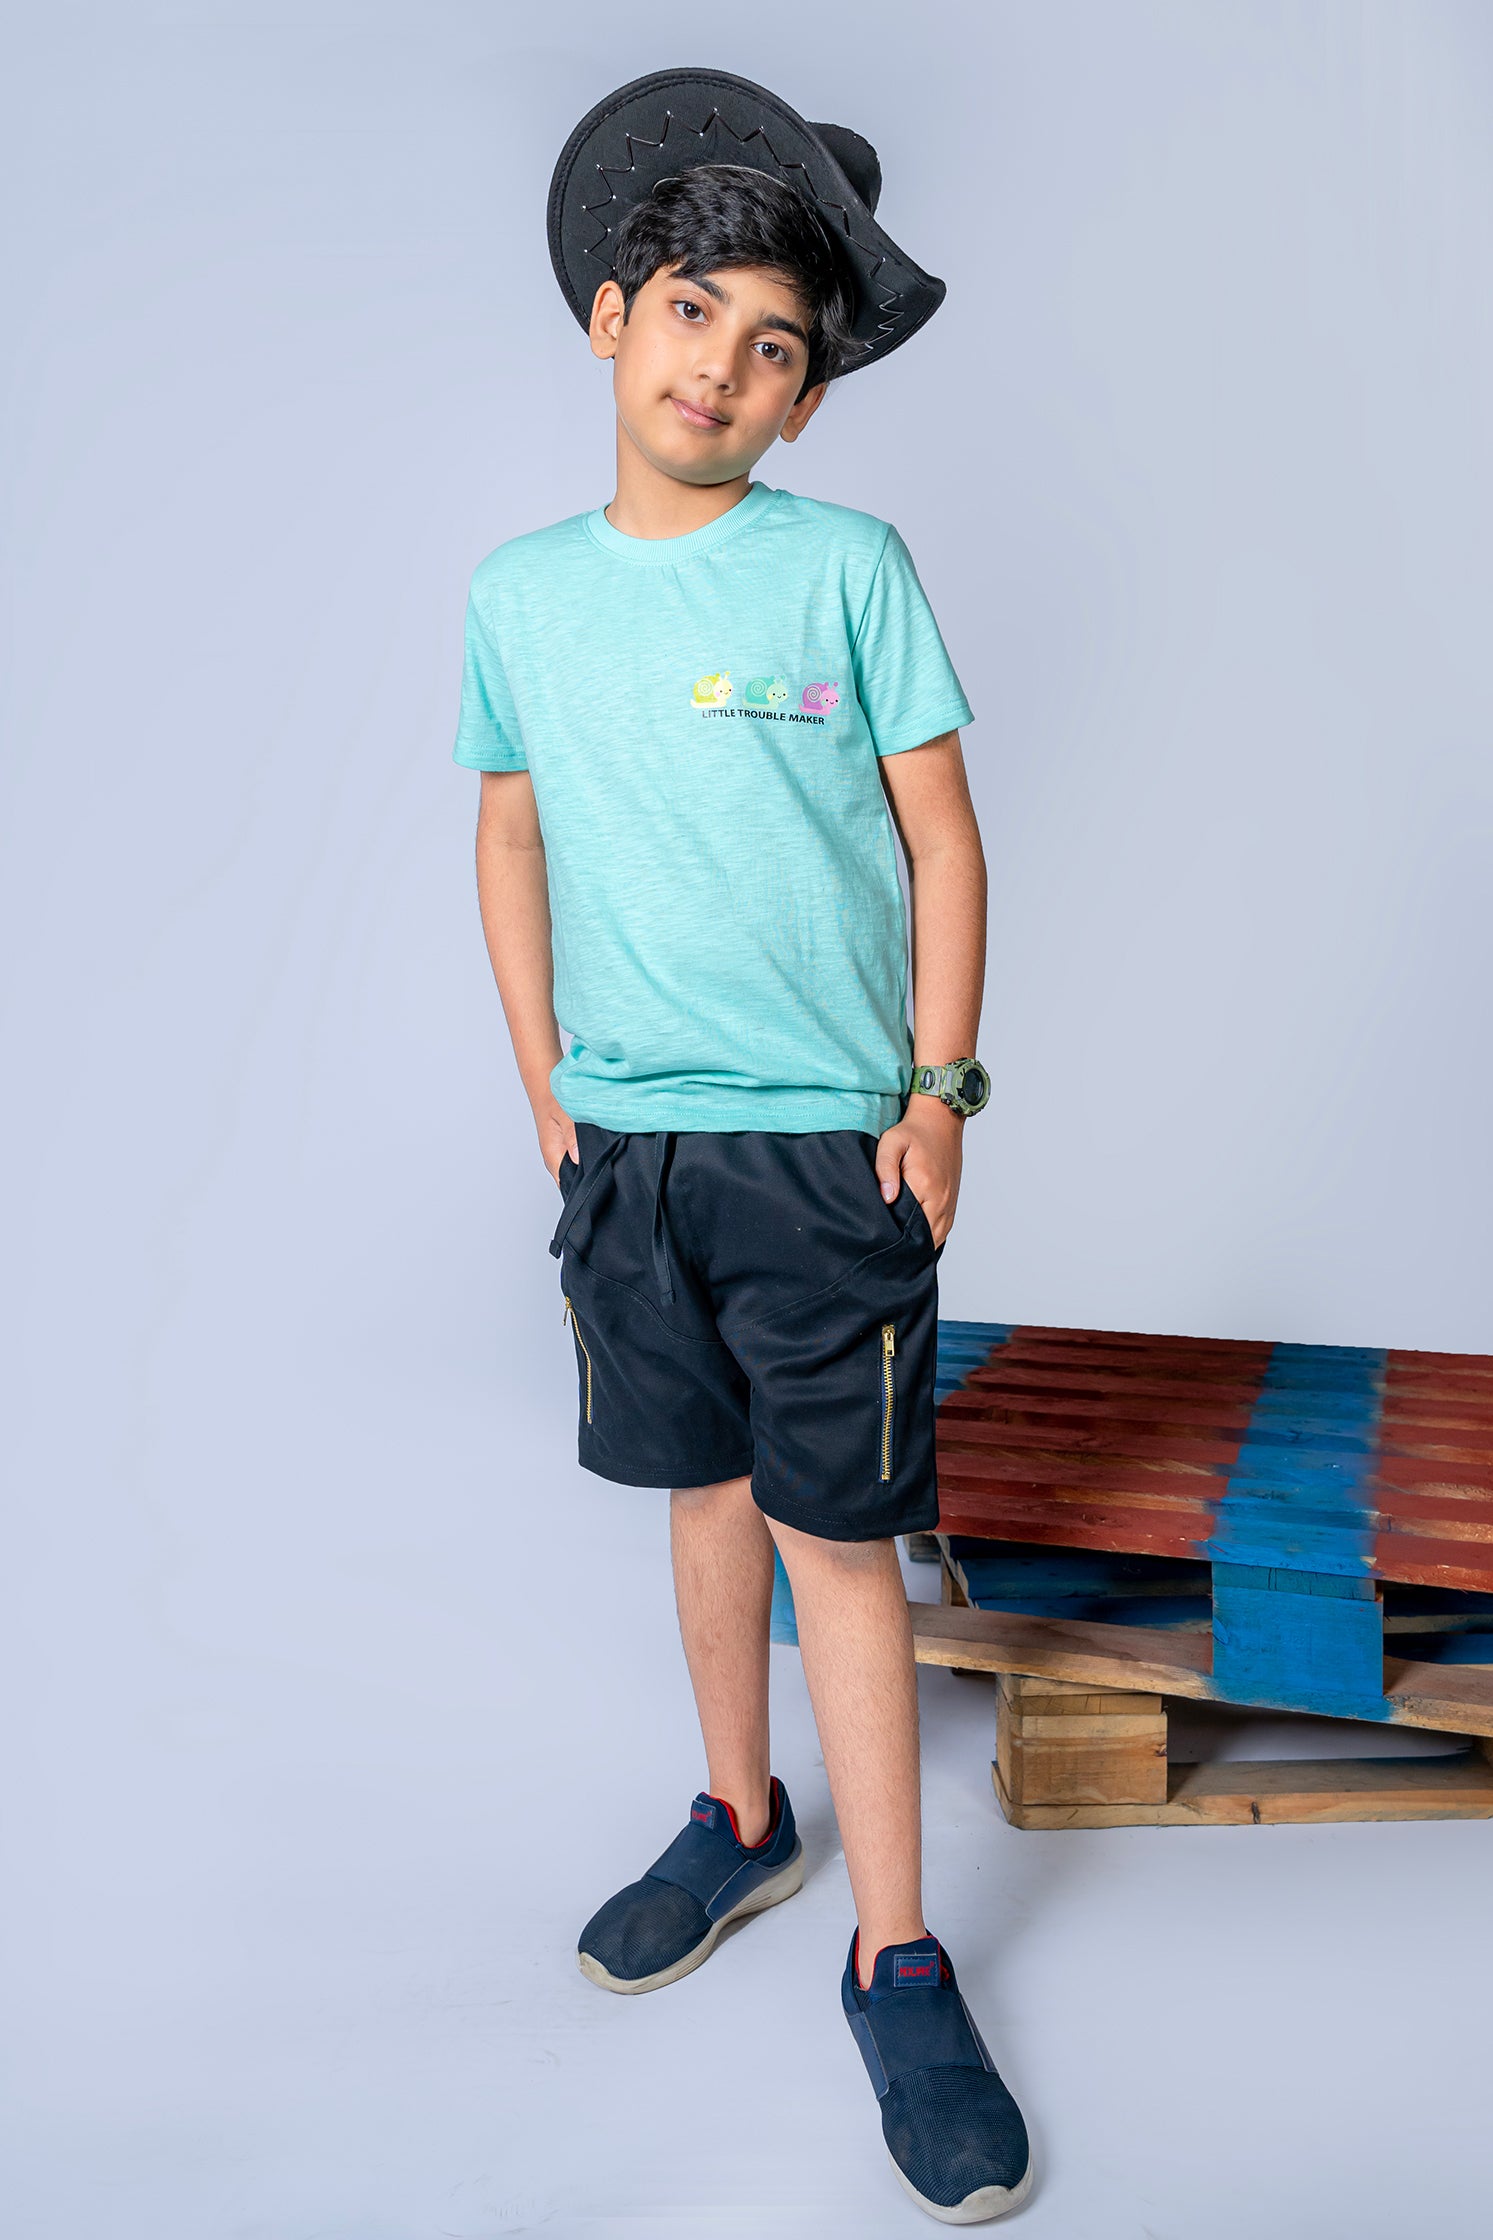 BOYS T-SHIRT WITH "LITTLE TROUBLE" PRINTING